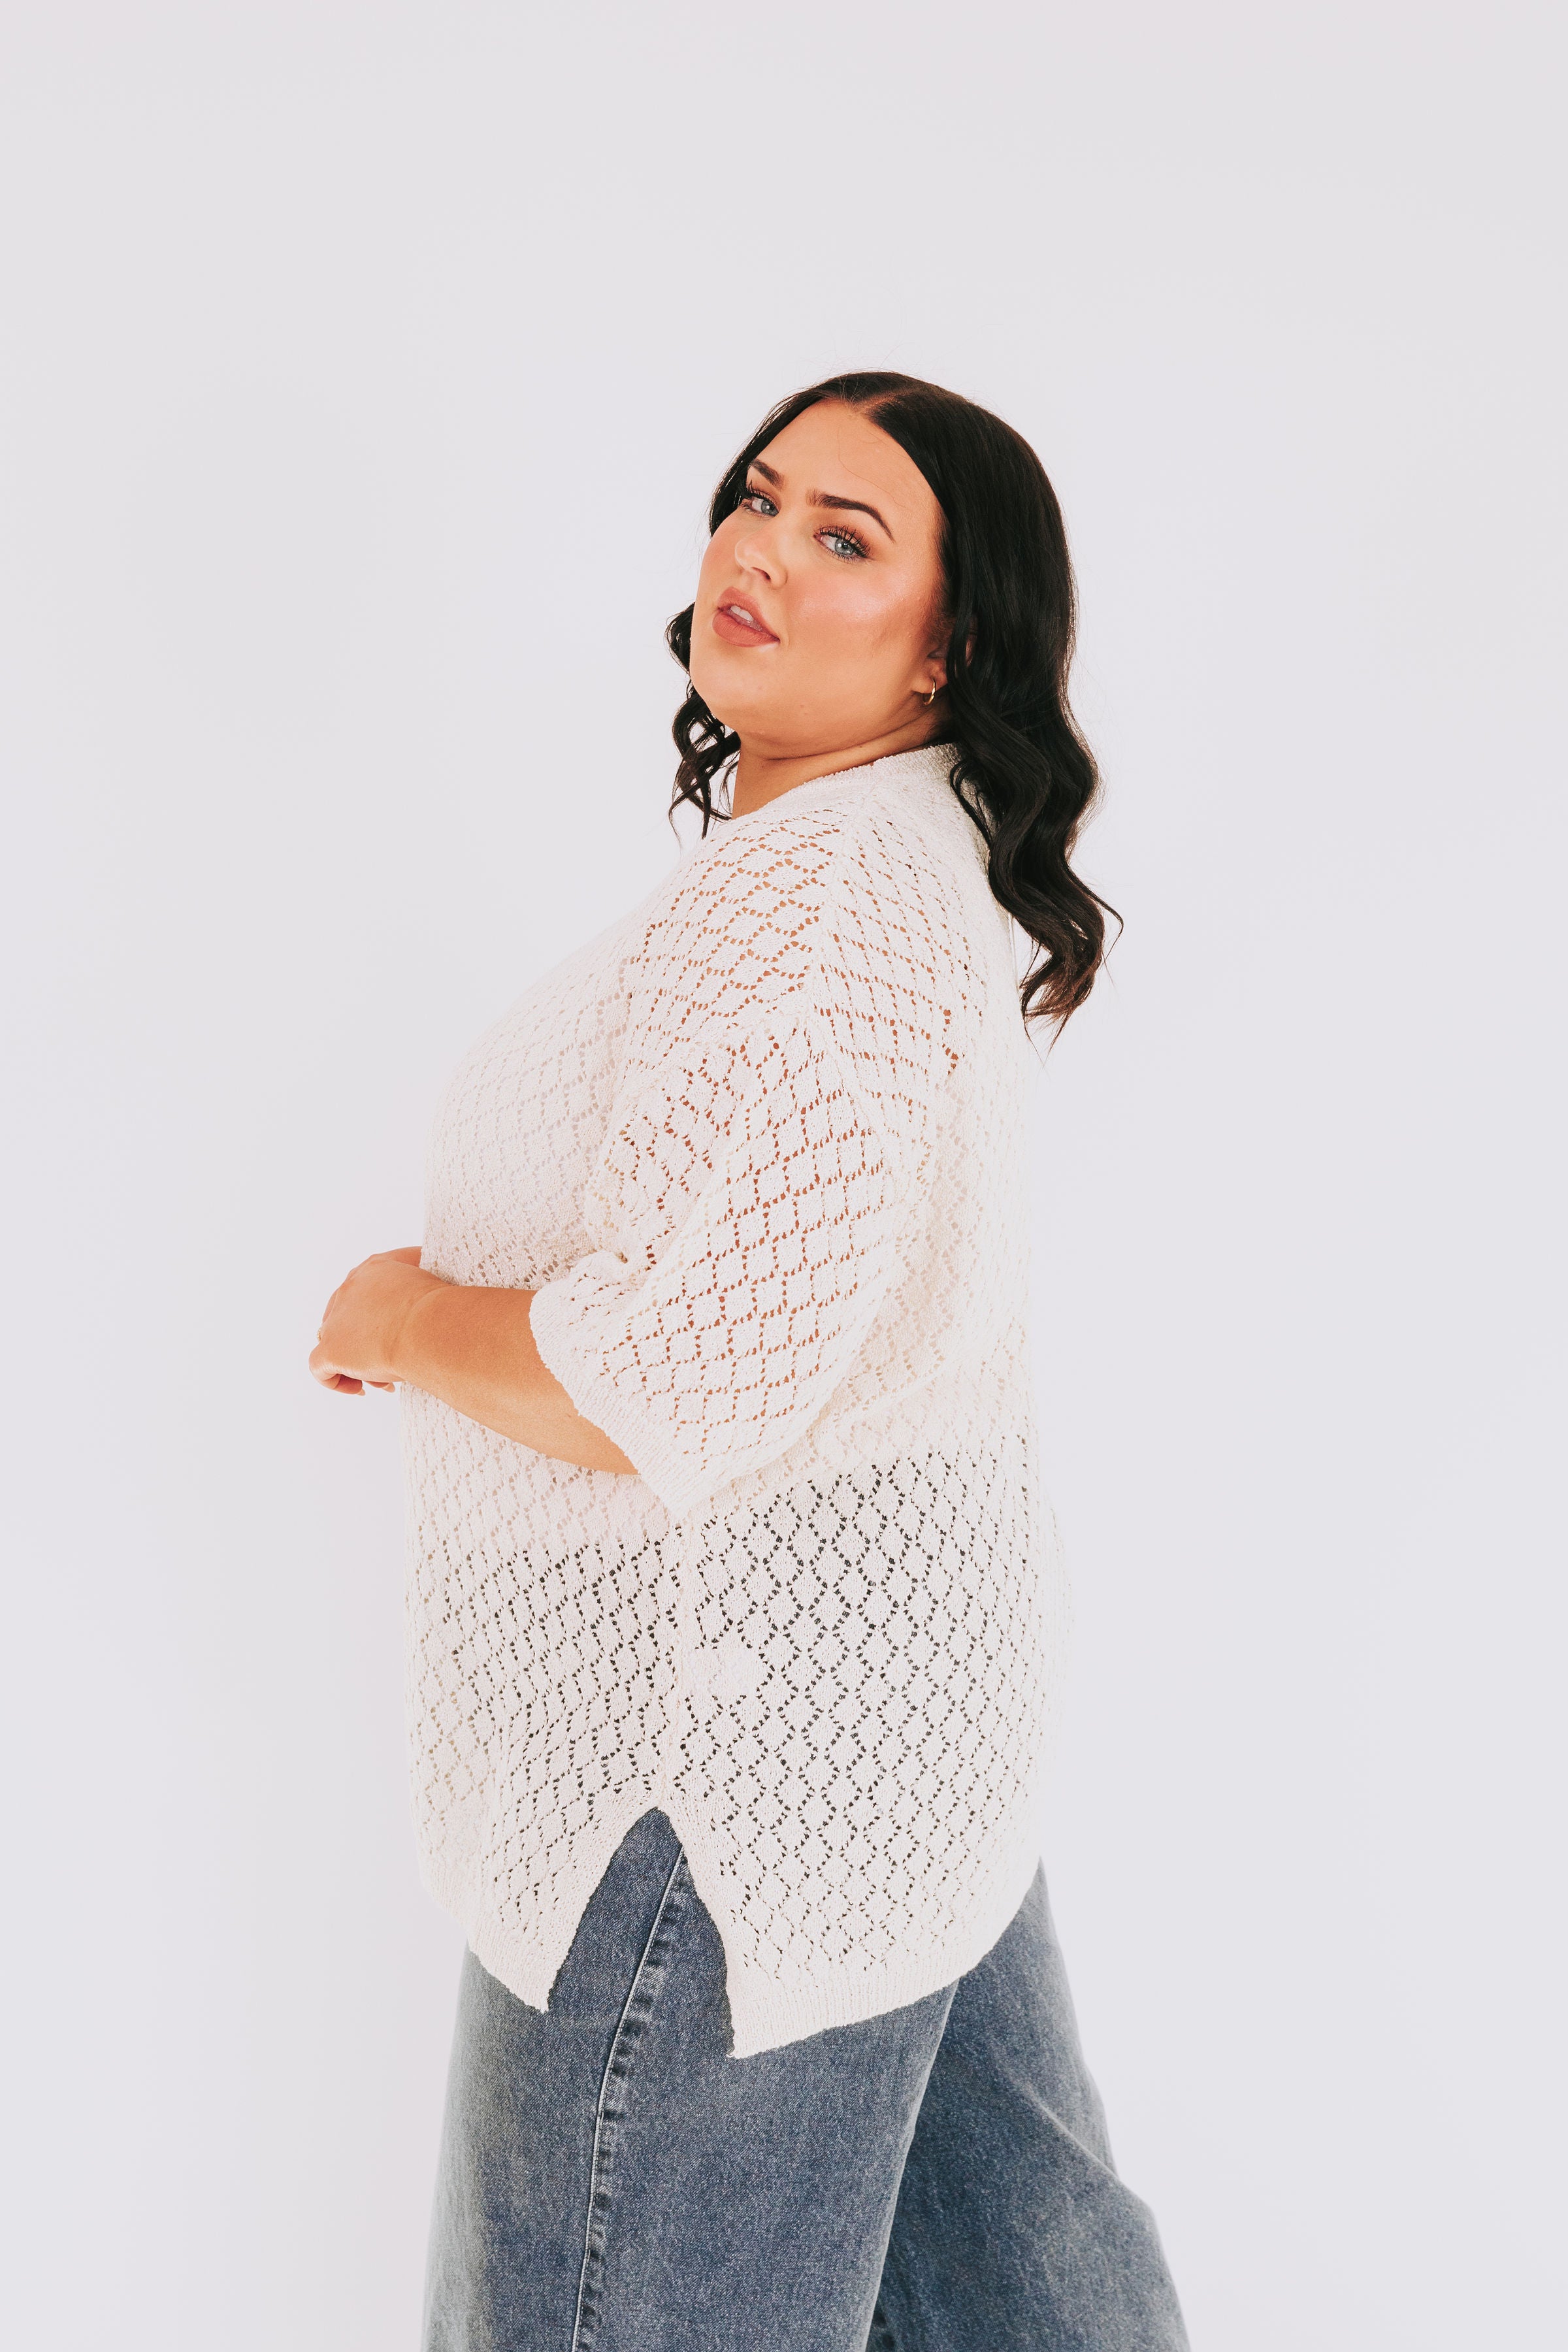 PLUS SIZE - All I Ever Wanted Top